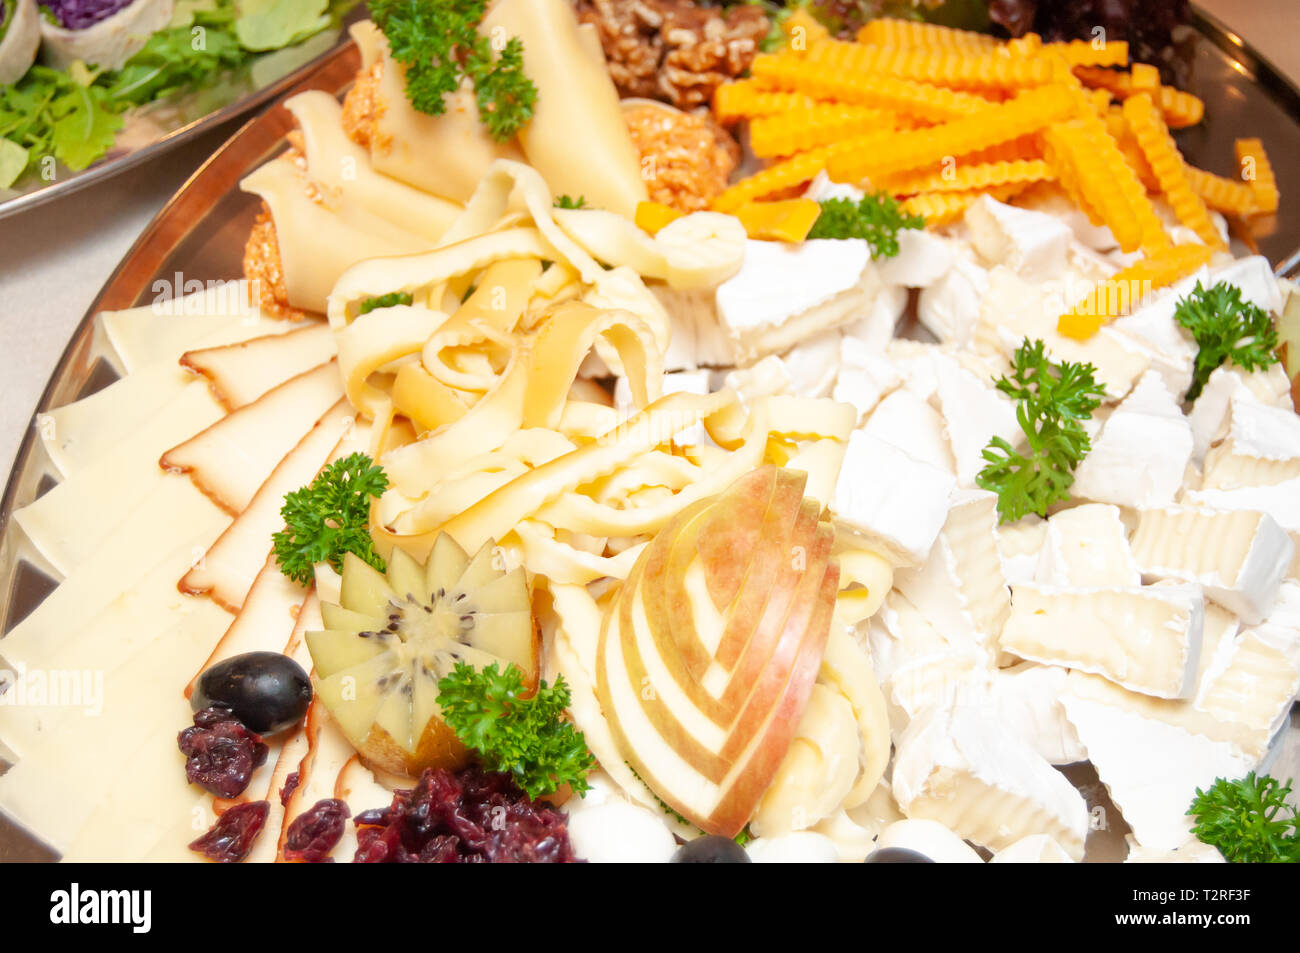 many sort of cheese and fruits plate Stock Photo